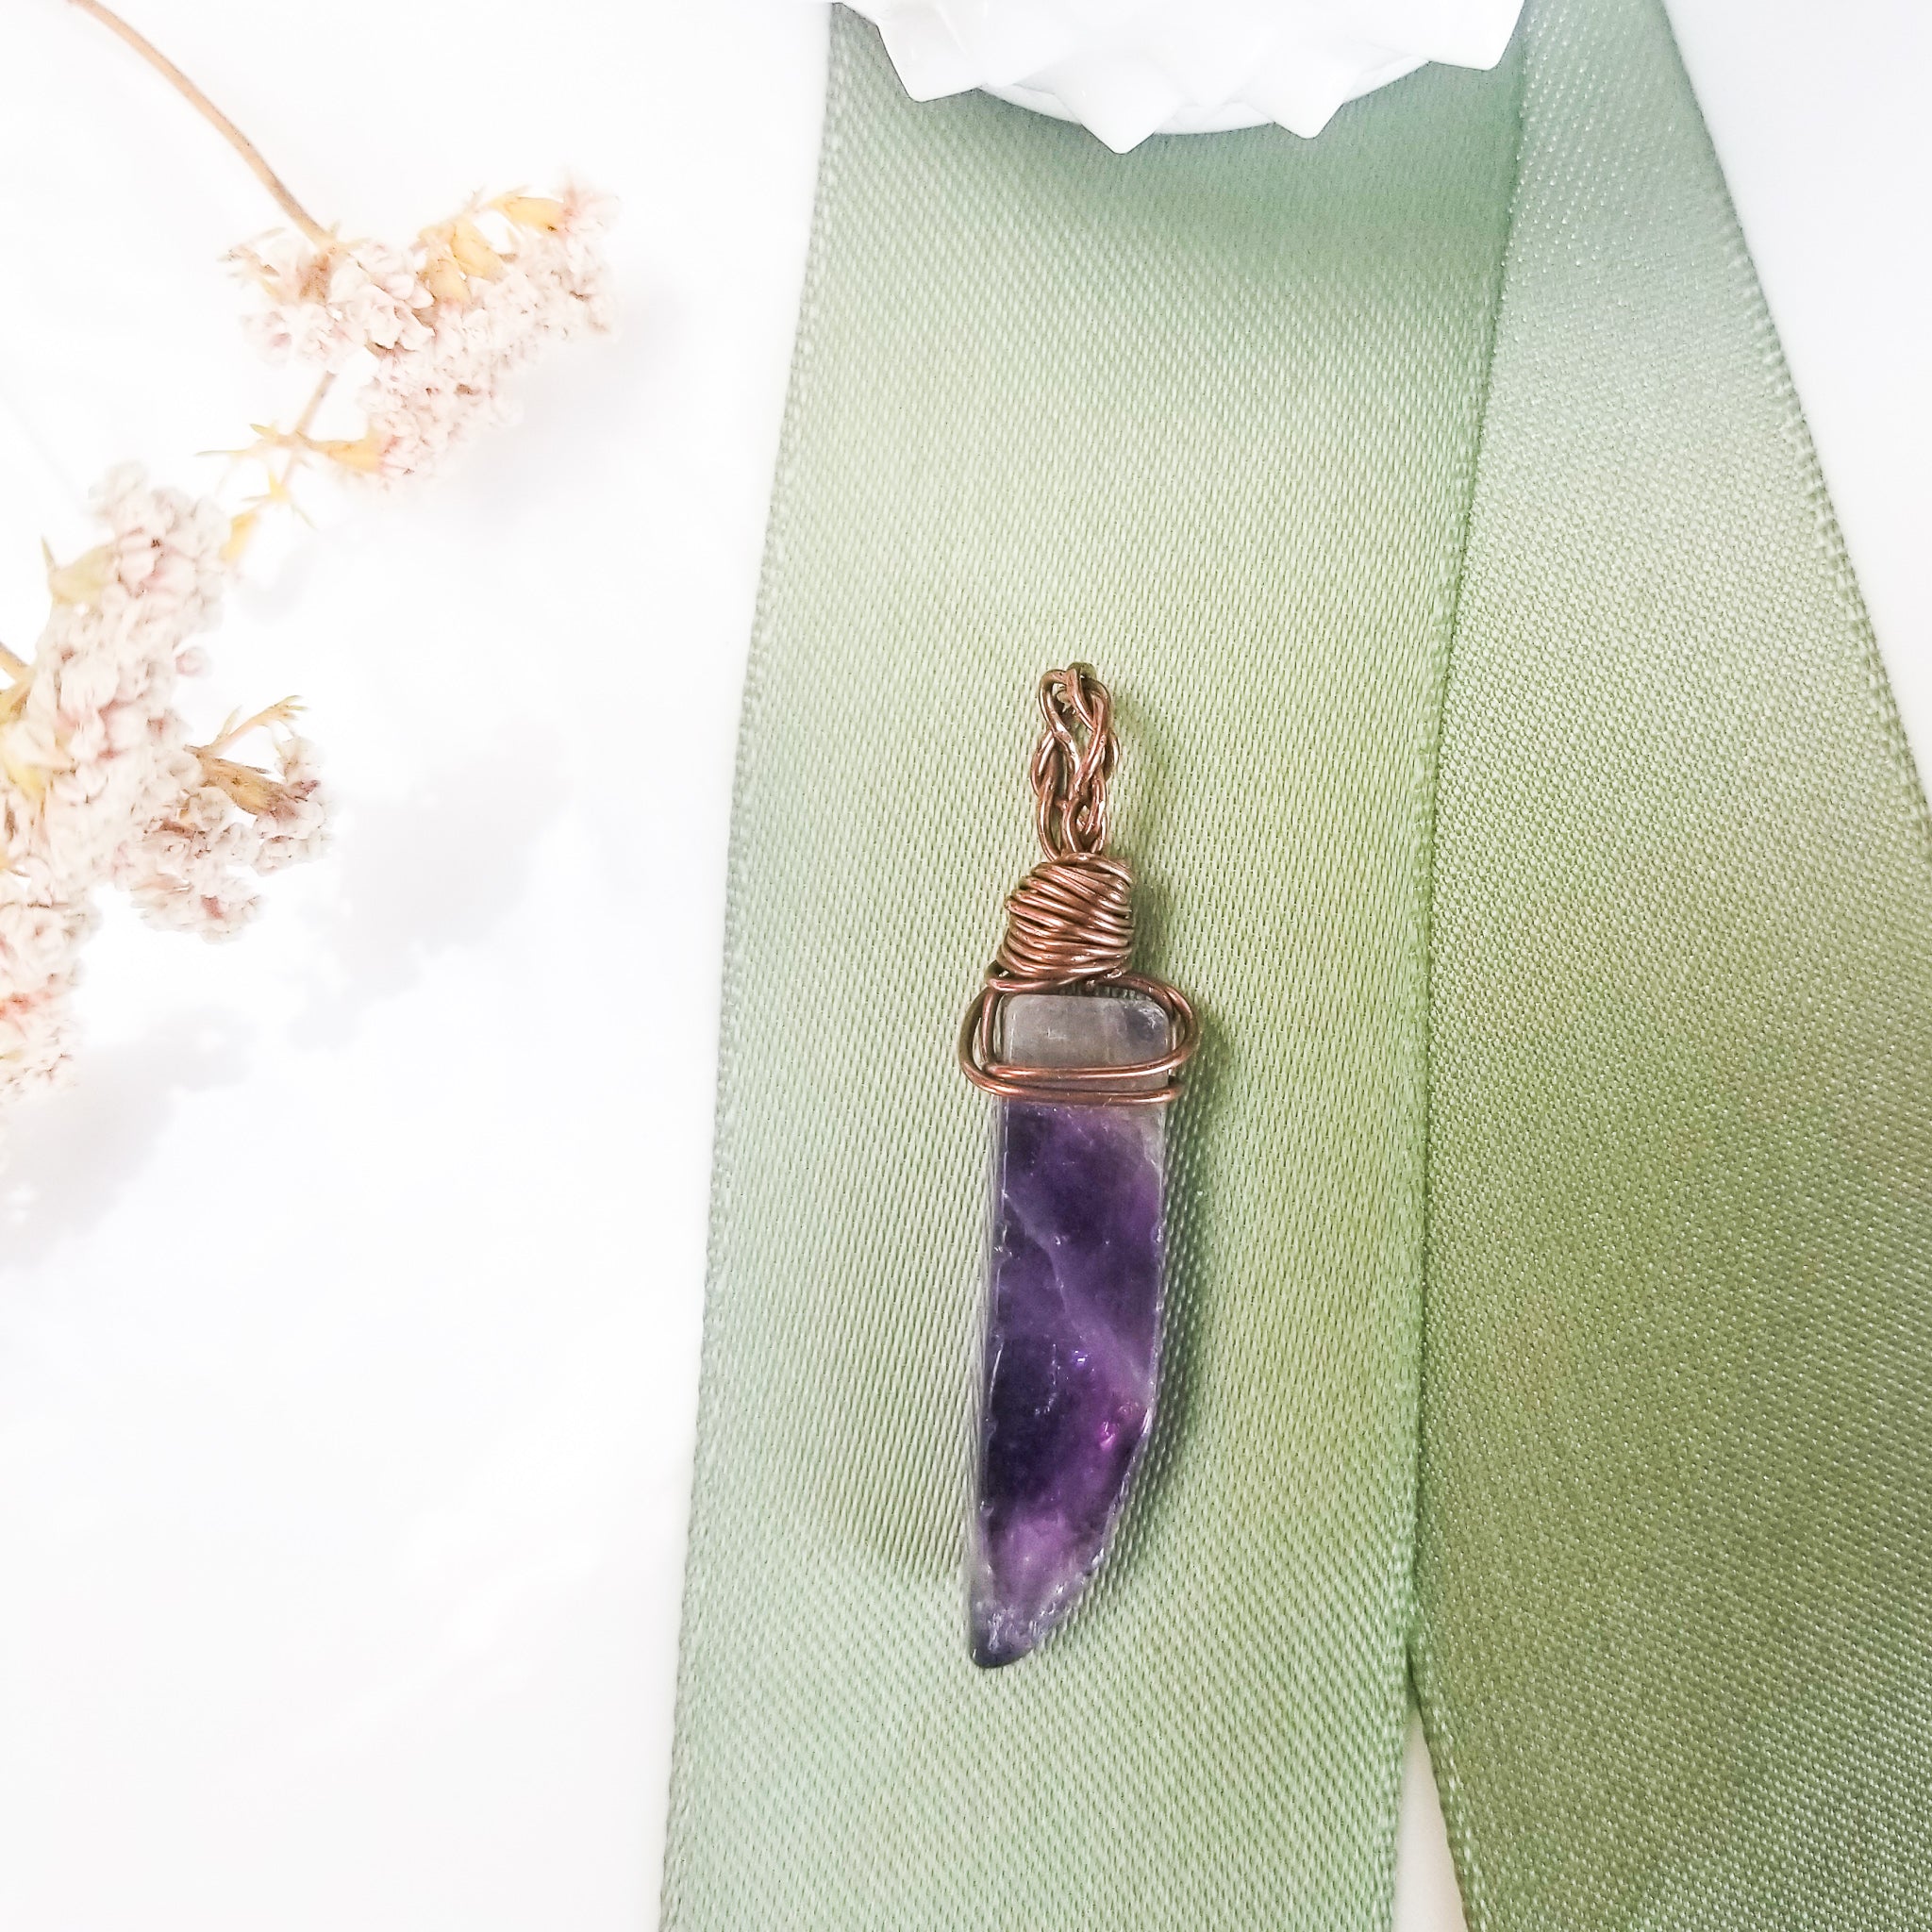 Beautiful Brazilian Amethyst Pendant in Antique Copper with a braided Bale - top view - BellaChel Jeweler